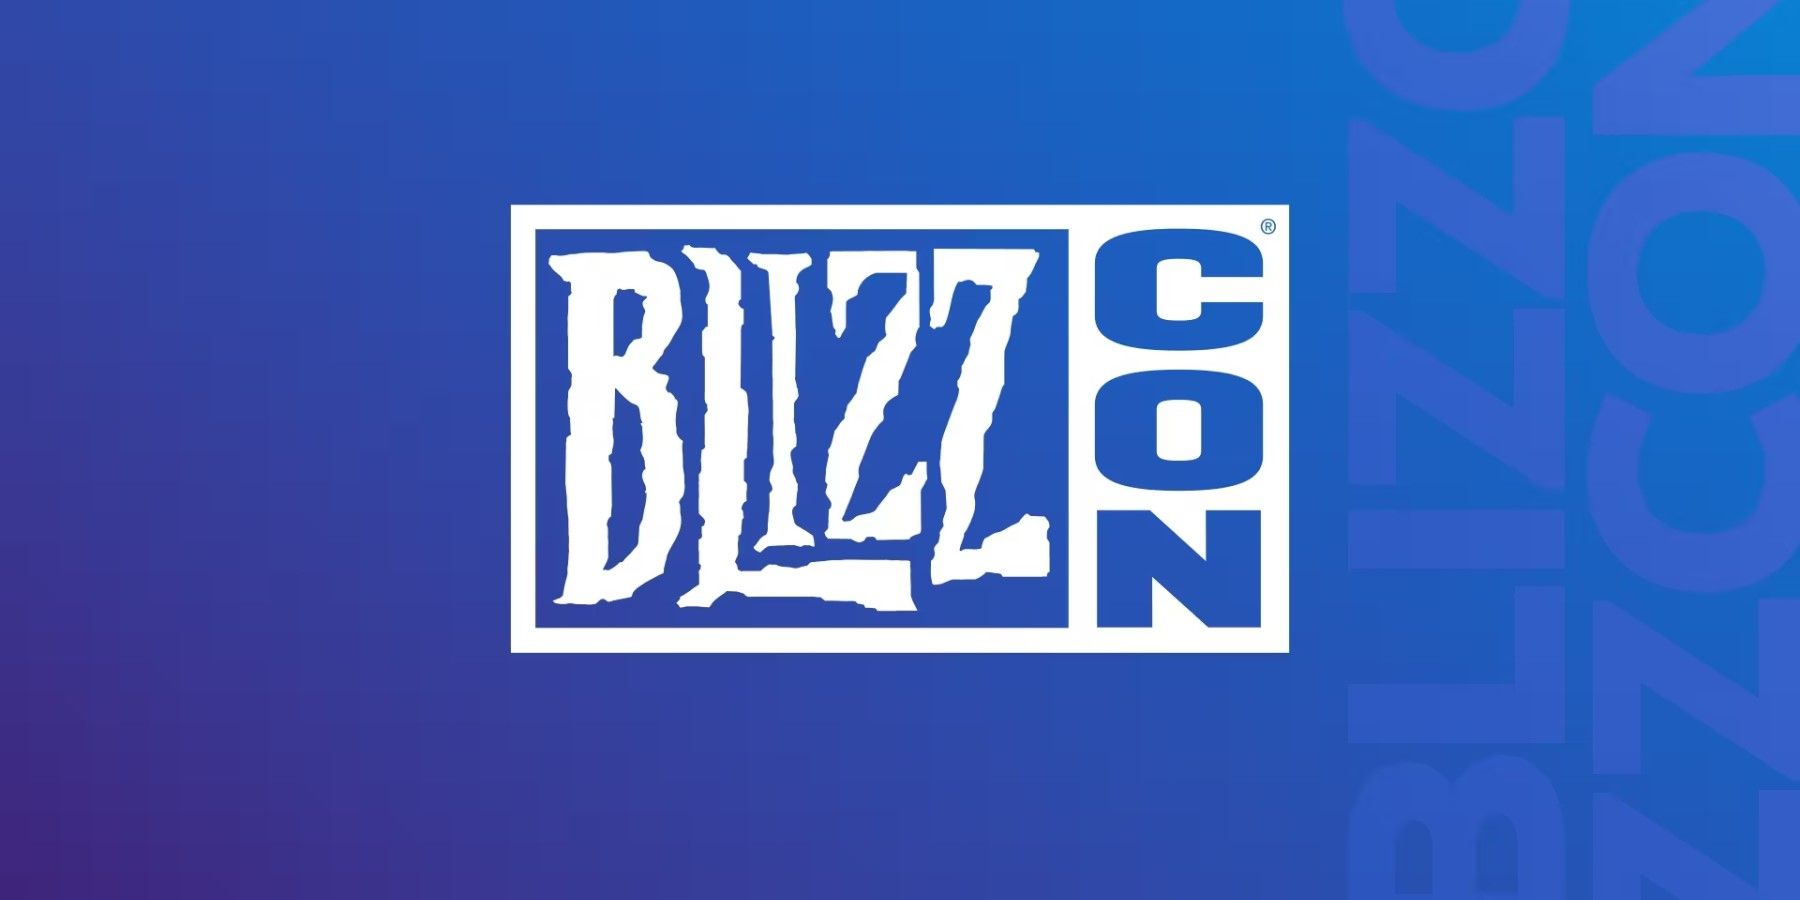 the logo for blizzcon